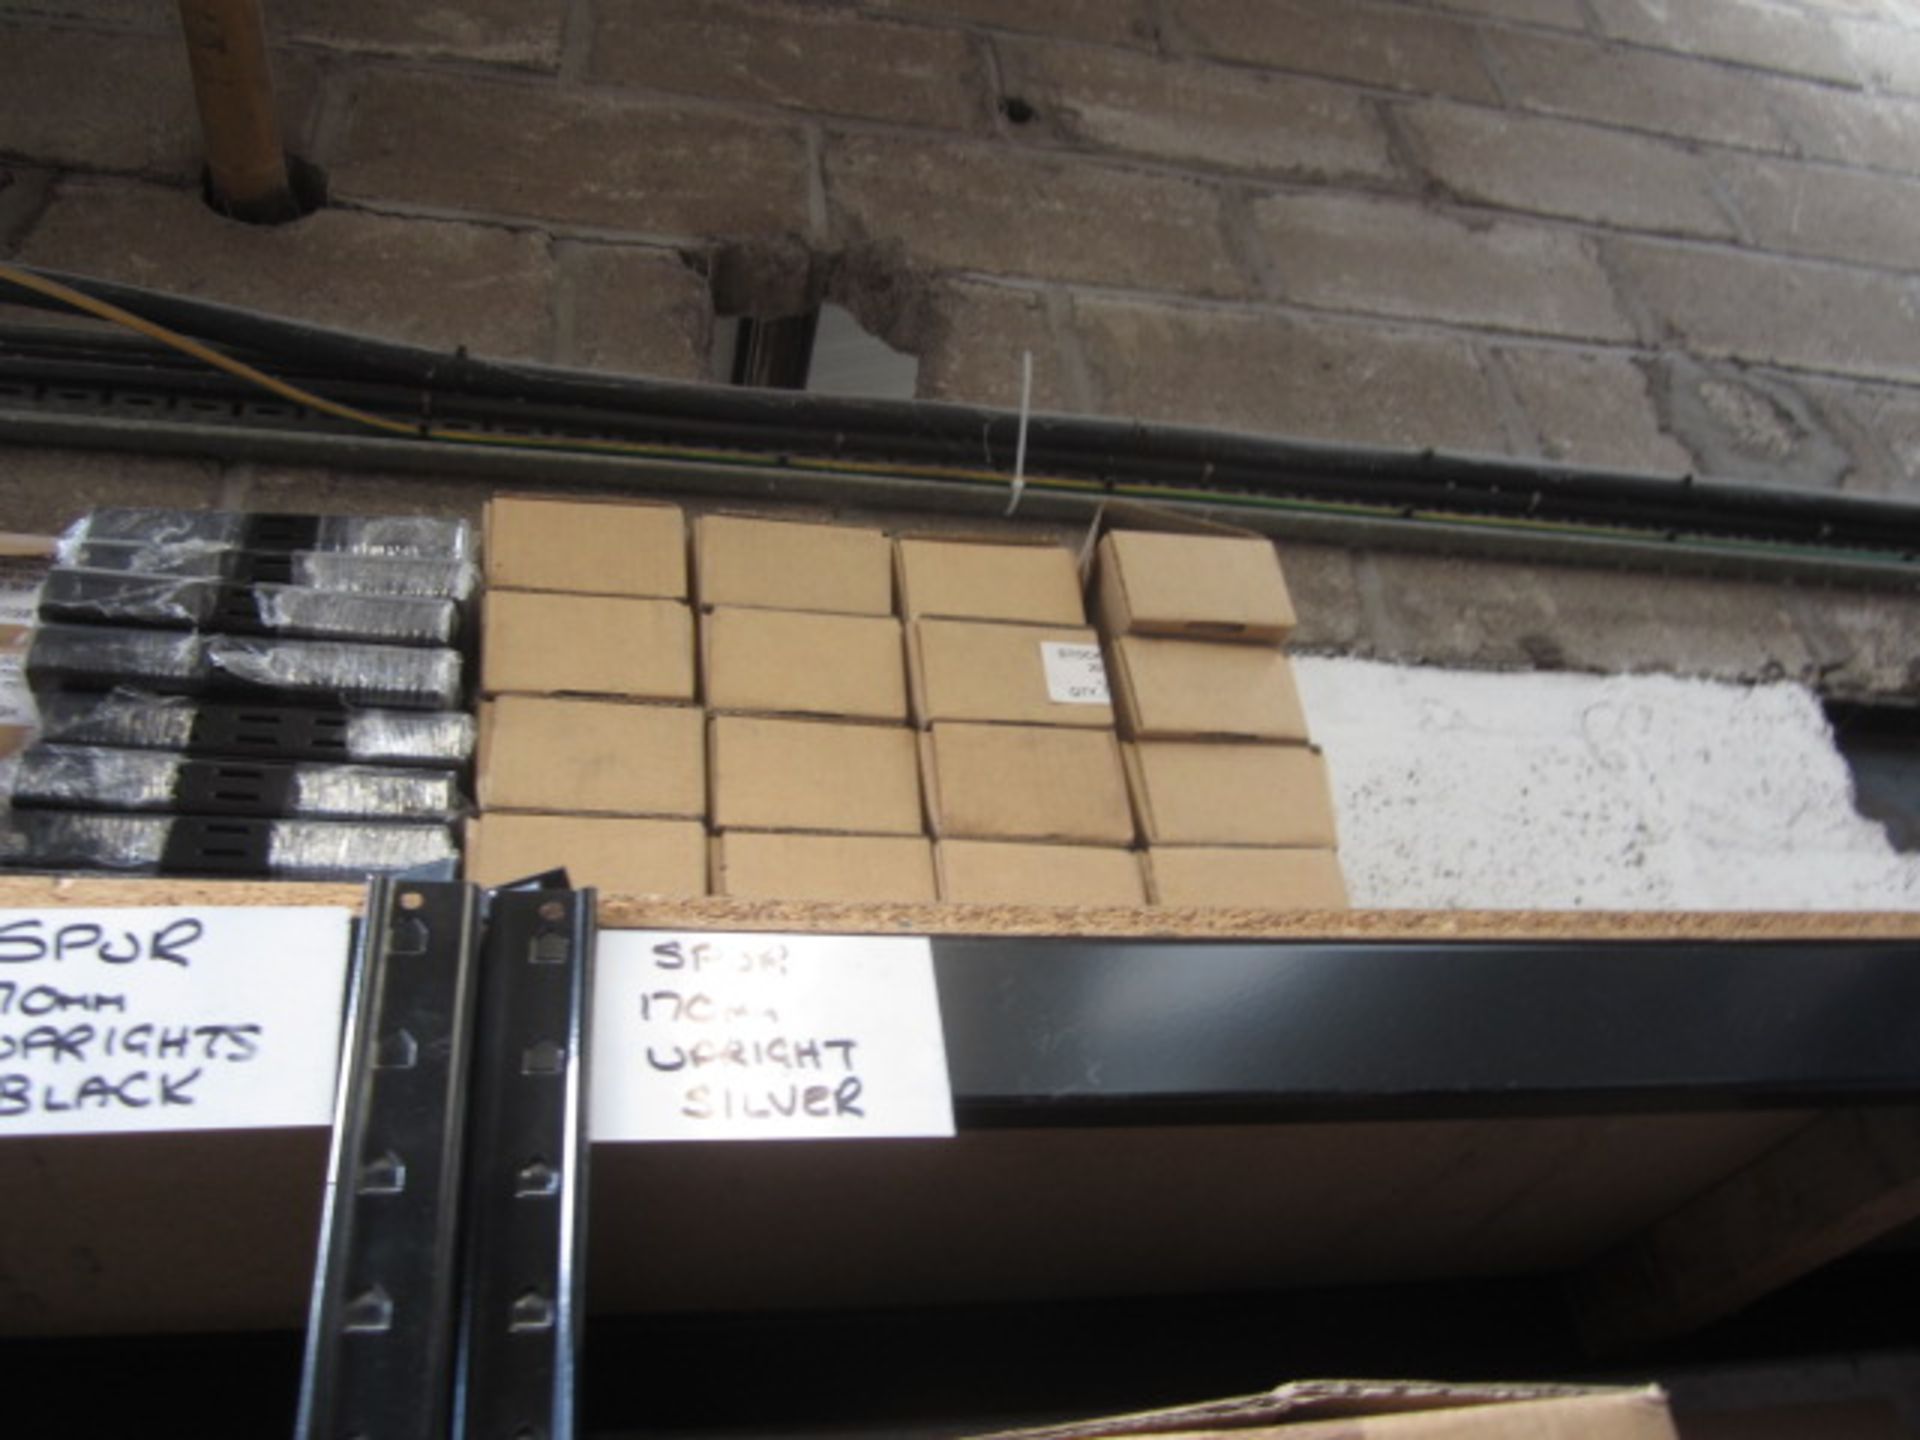 Contents of two bays of racking to include Spur uprights 710mm, 1000mm, Spur Steel-Lok black/ - Image 8 of 16